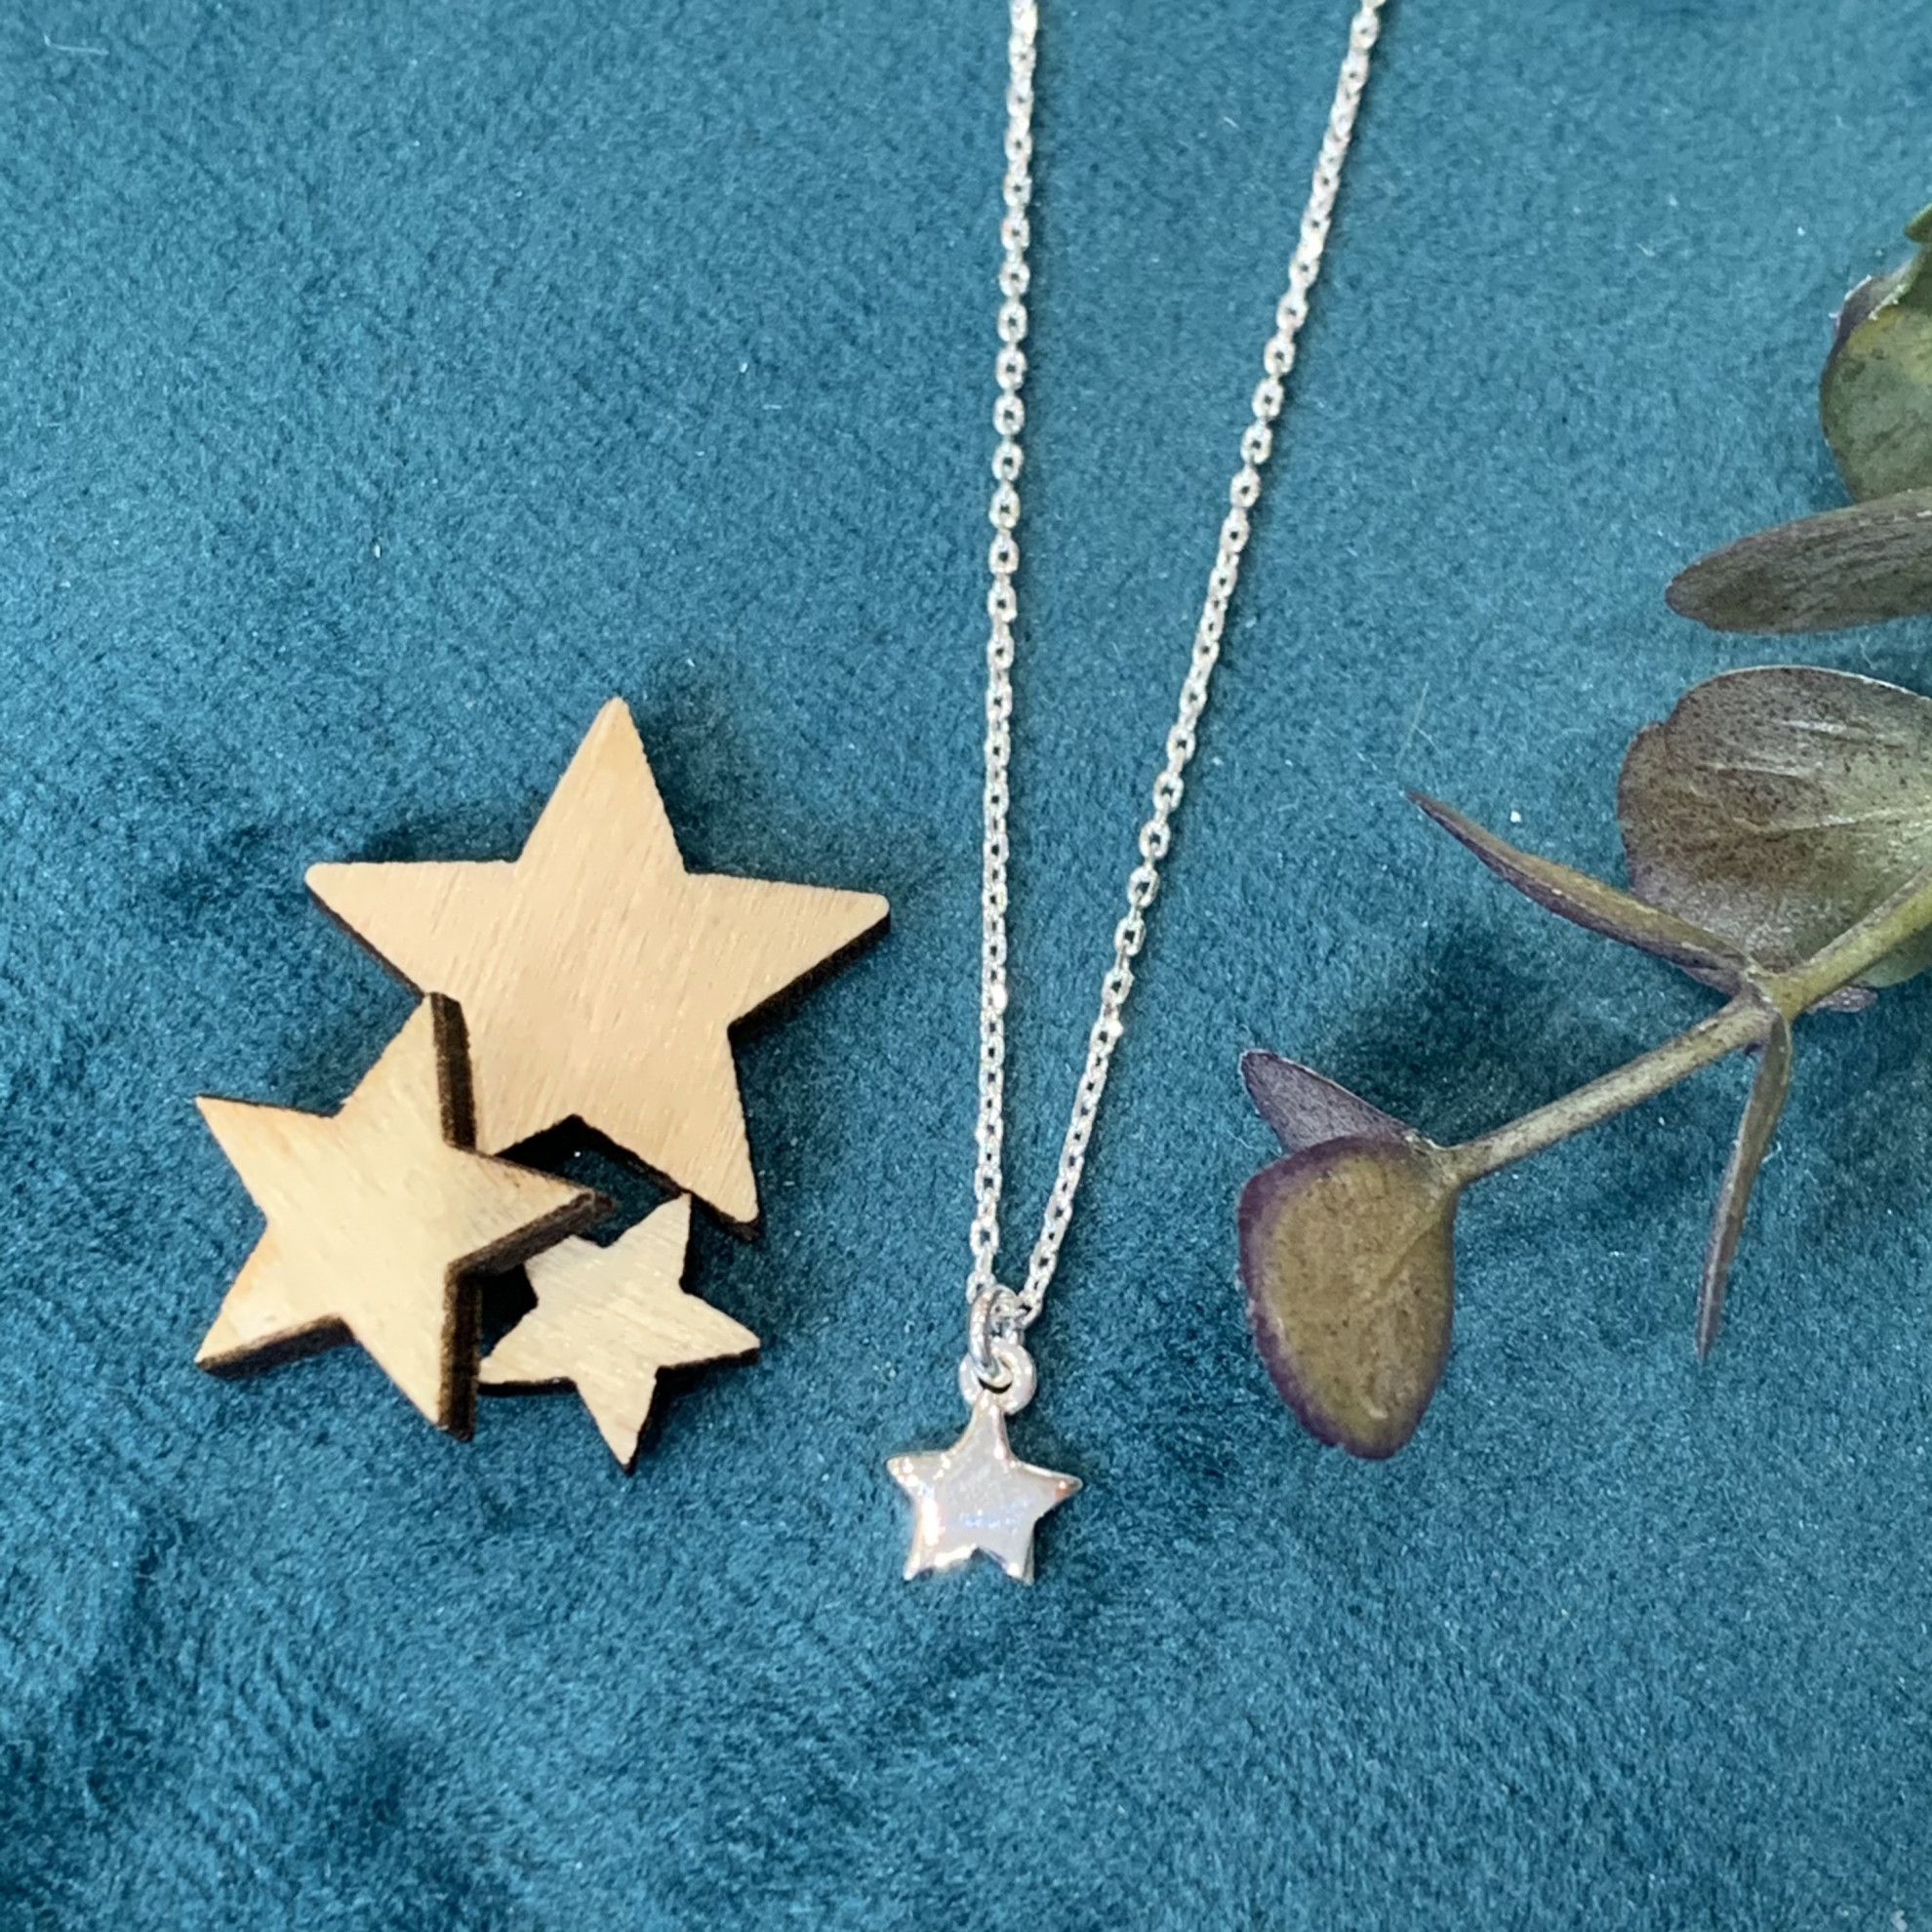 41-45cm Small Star on Chain